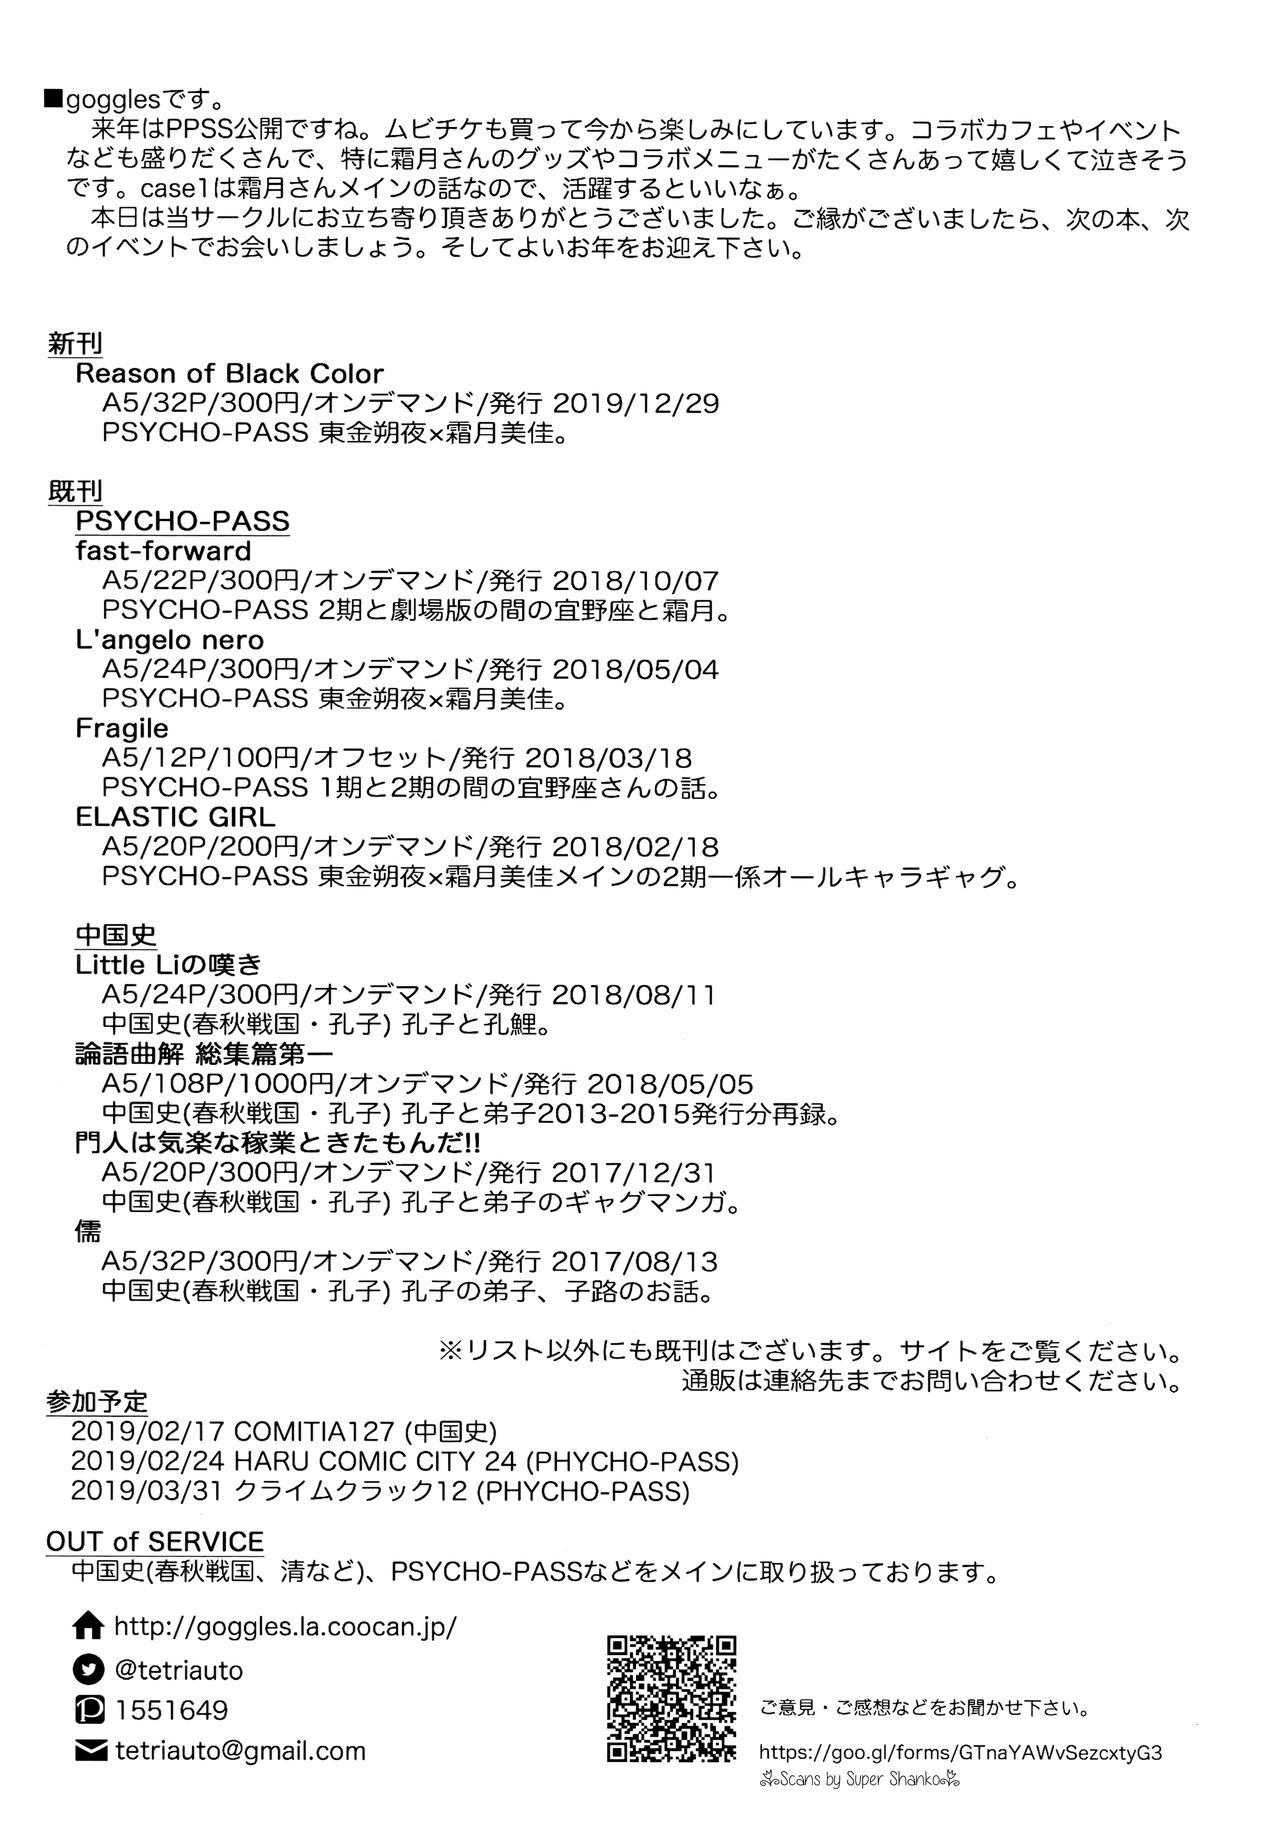 (C95) [OUT of SERVICE (goggles)] Reason of Black Color (PSYCHO-PASS サイコパス)